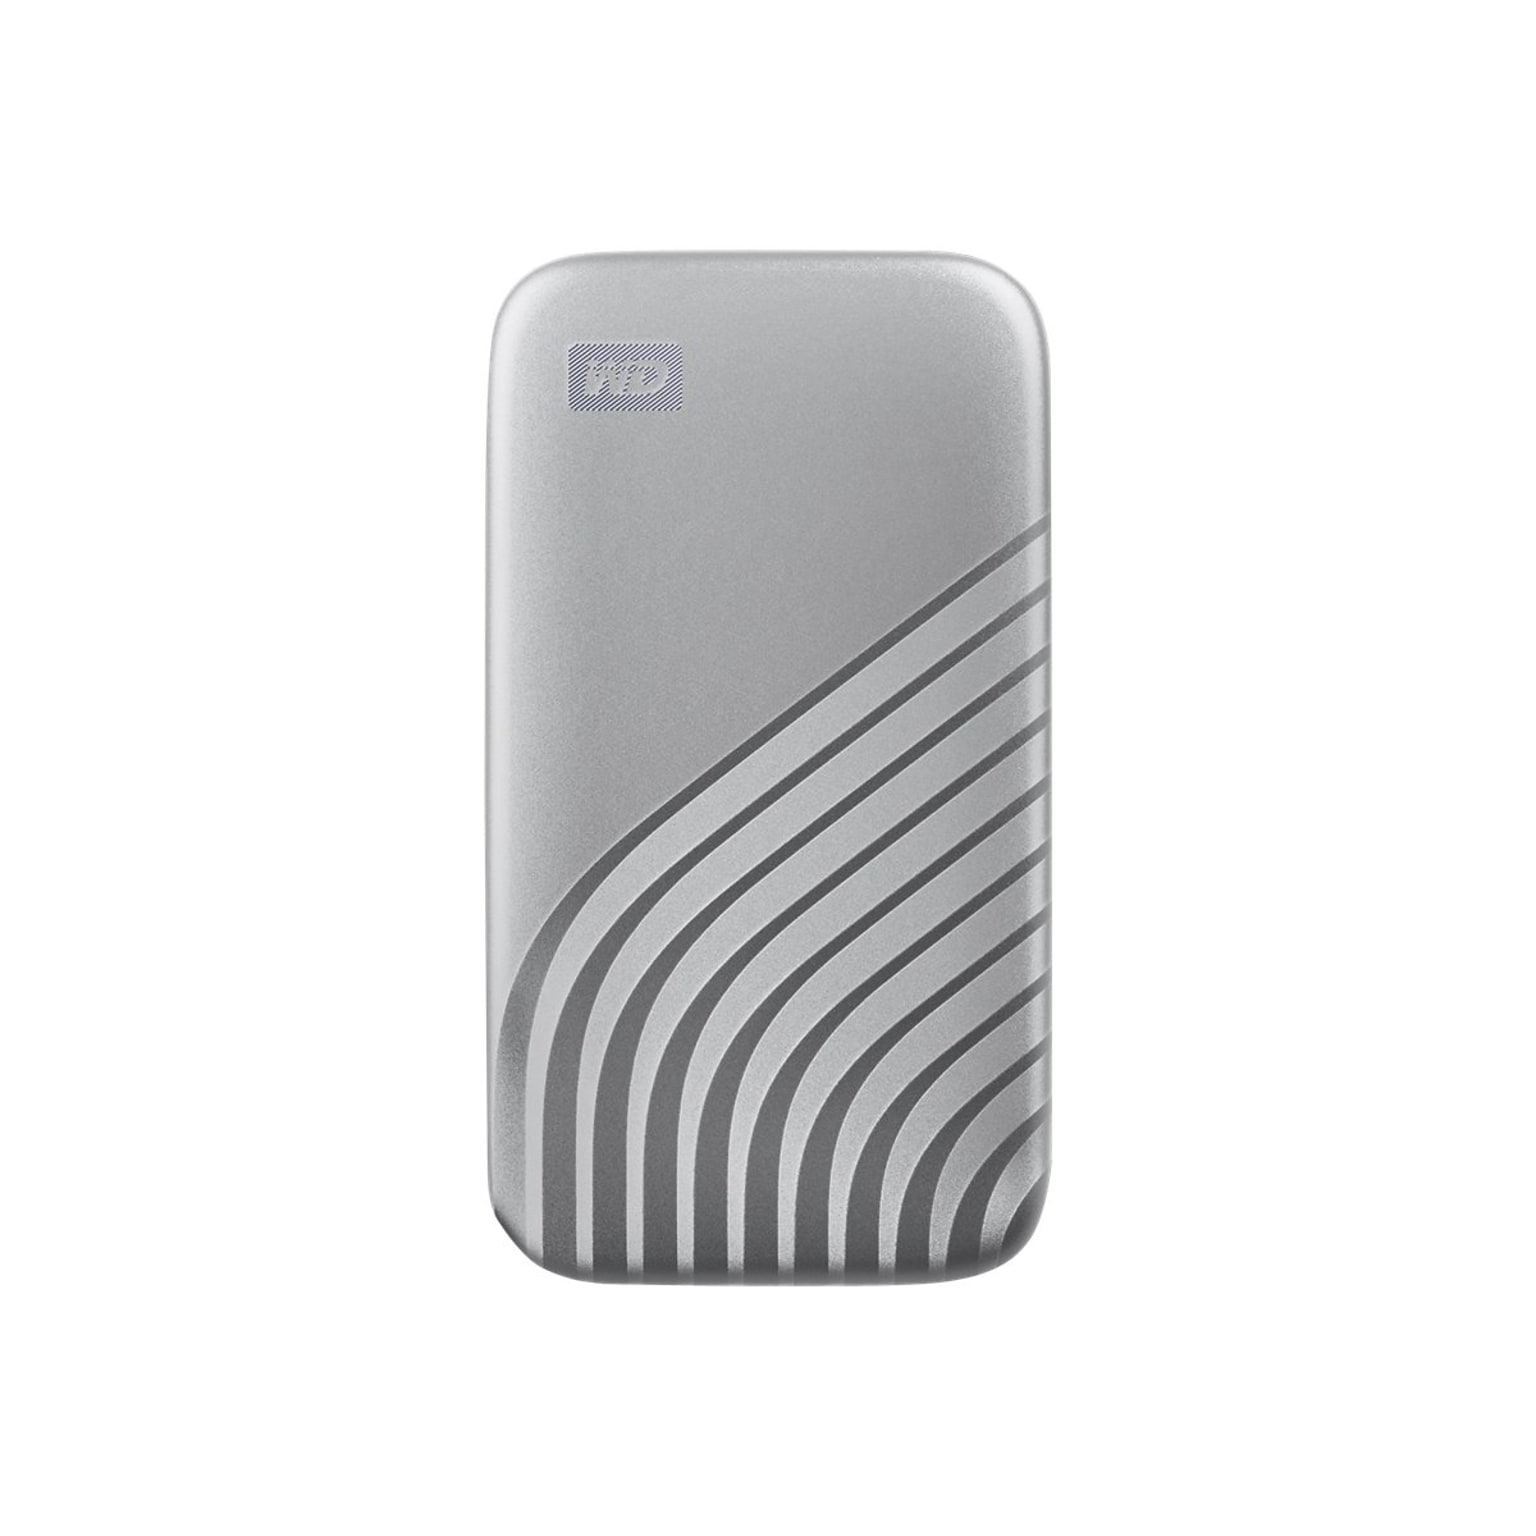 WD My Passport 1TB USB 3.2 External Solid-State Drive, Silver (WDBAGF0010BSL-WESN)